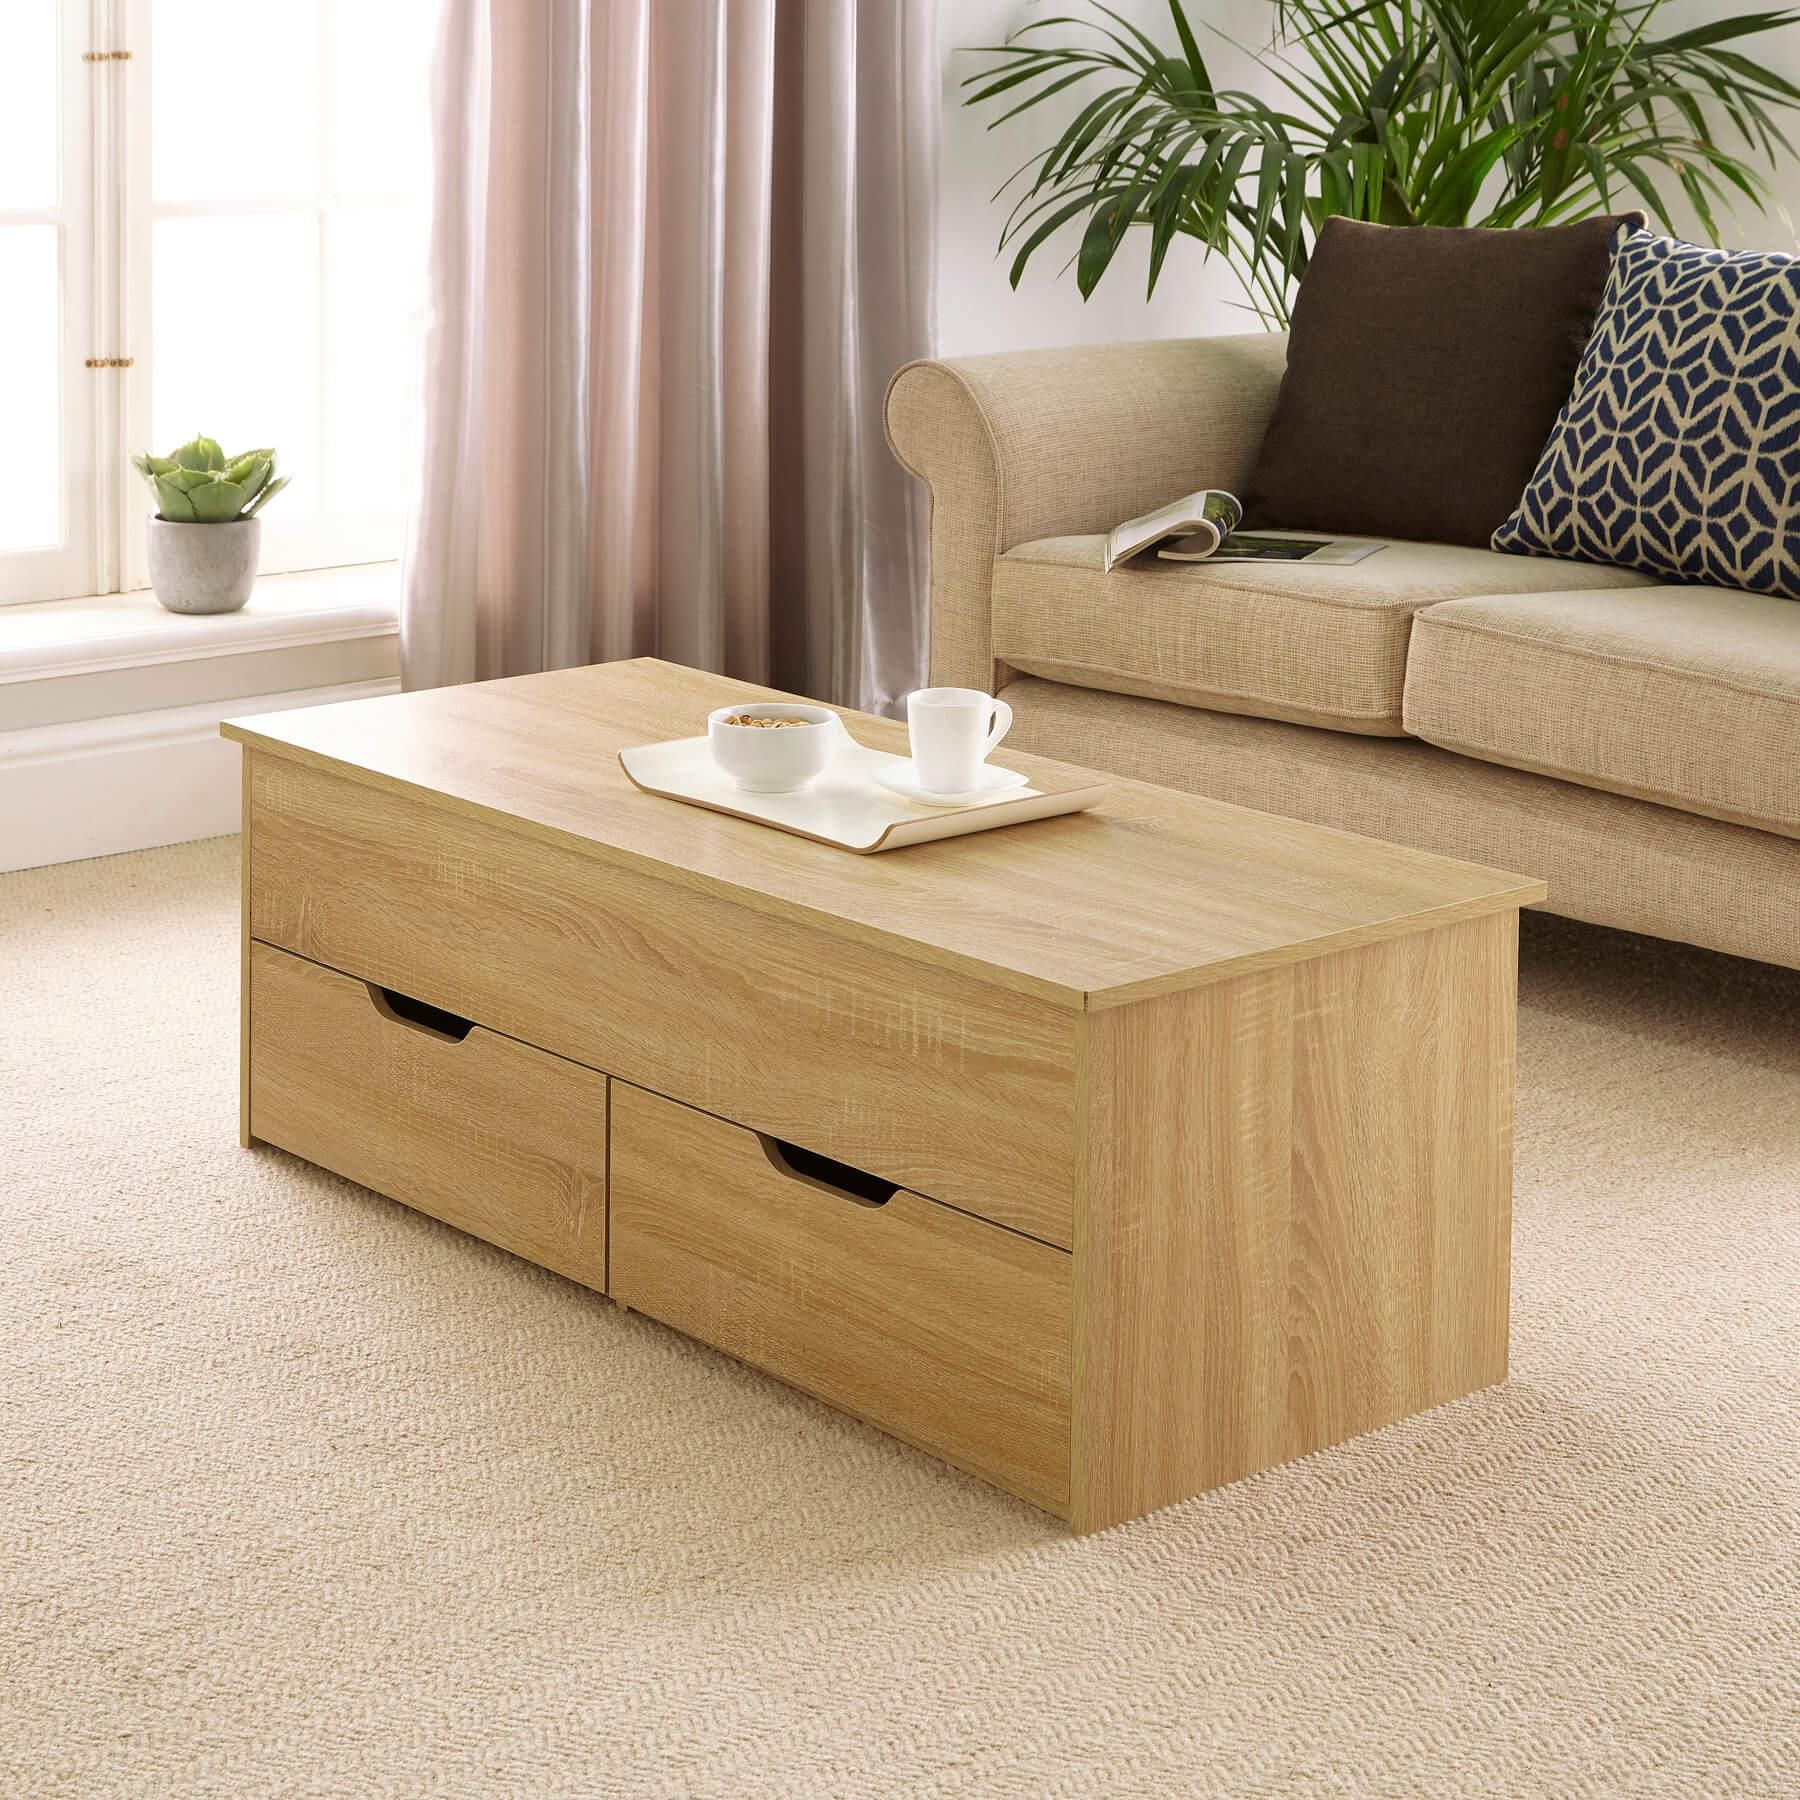 Oak Wooden Coffee Table With Lift Up Top And 2 Large Storage Drawers Pertaining To Lift Top Coffee Tables With Storage Drawers (Gallery 6 of 20)